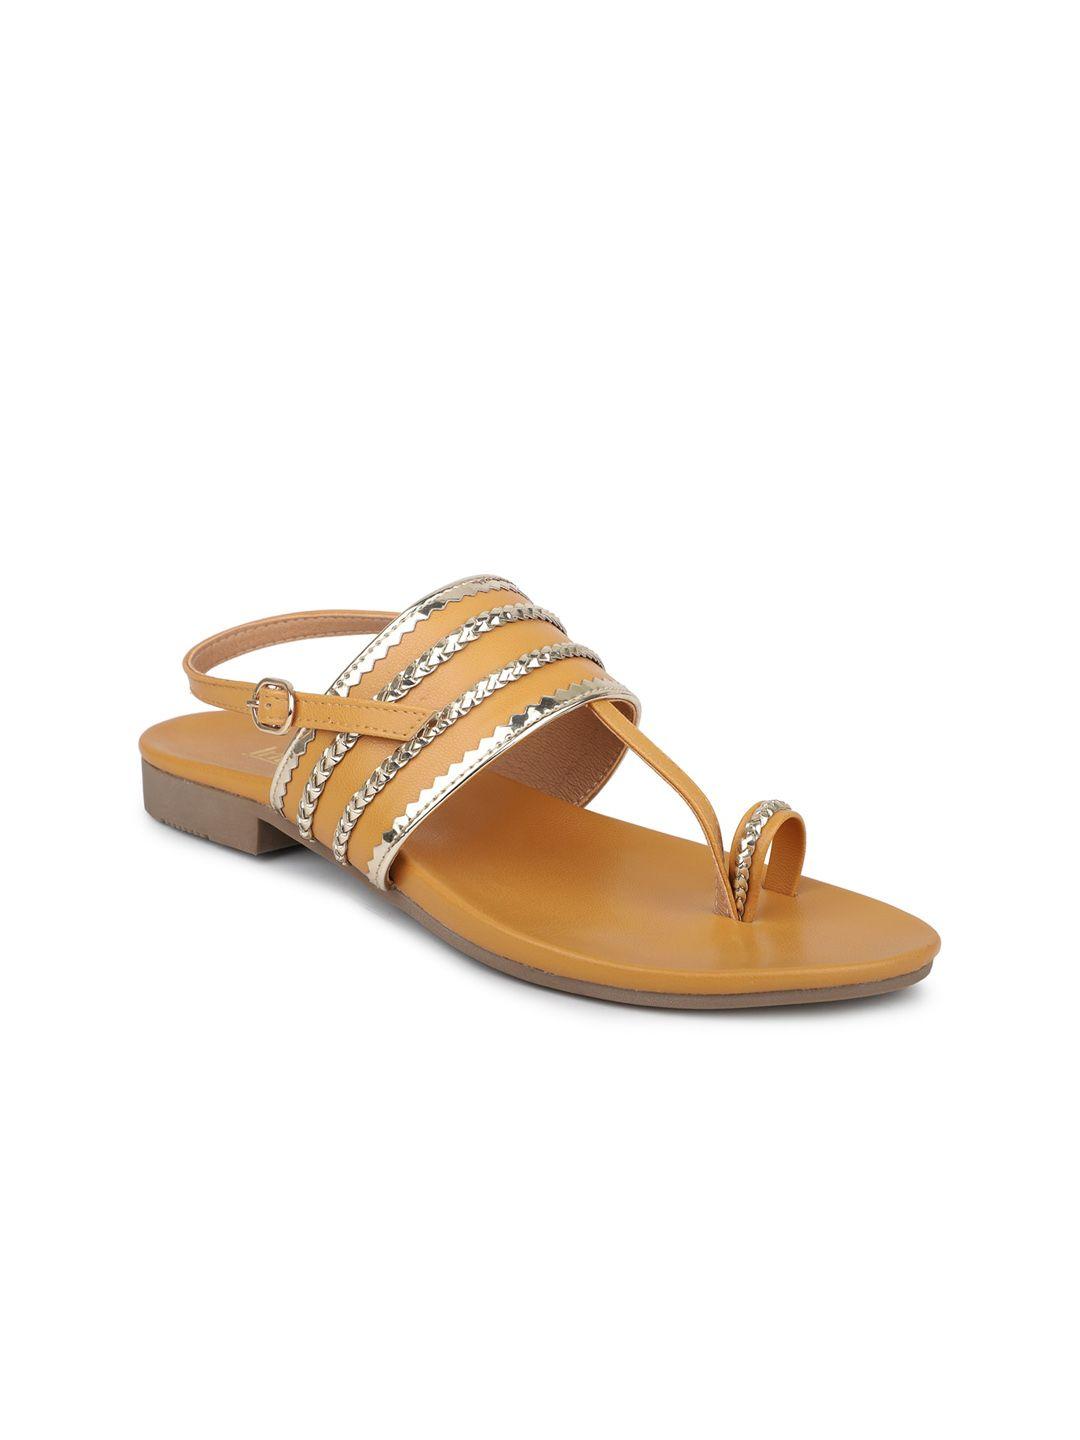 inc 5 ethnic braided one toe flats with buckle detail